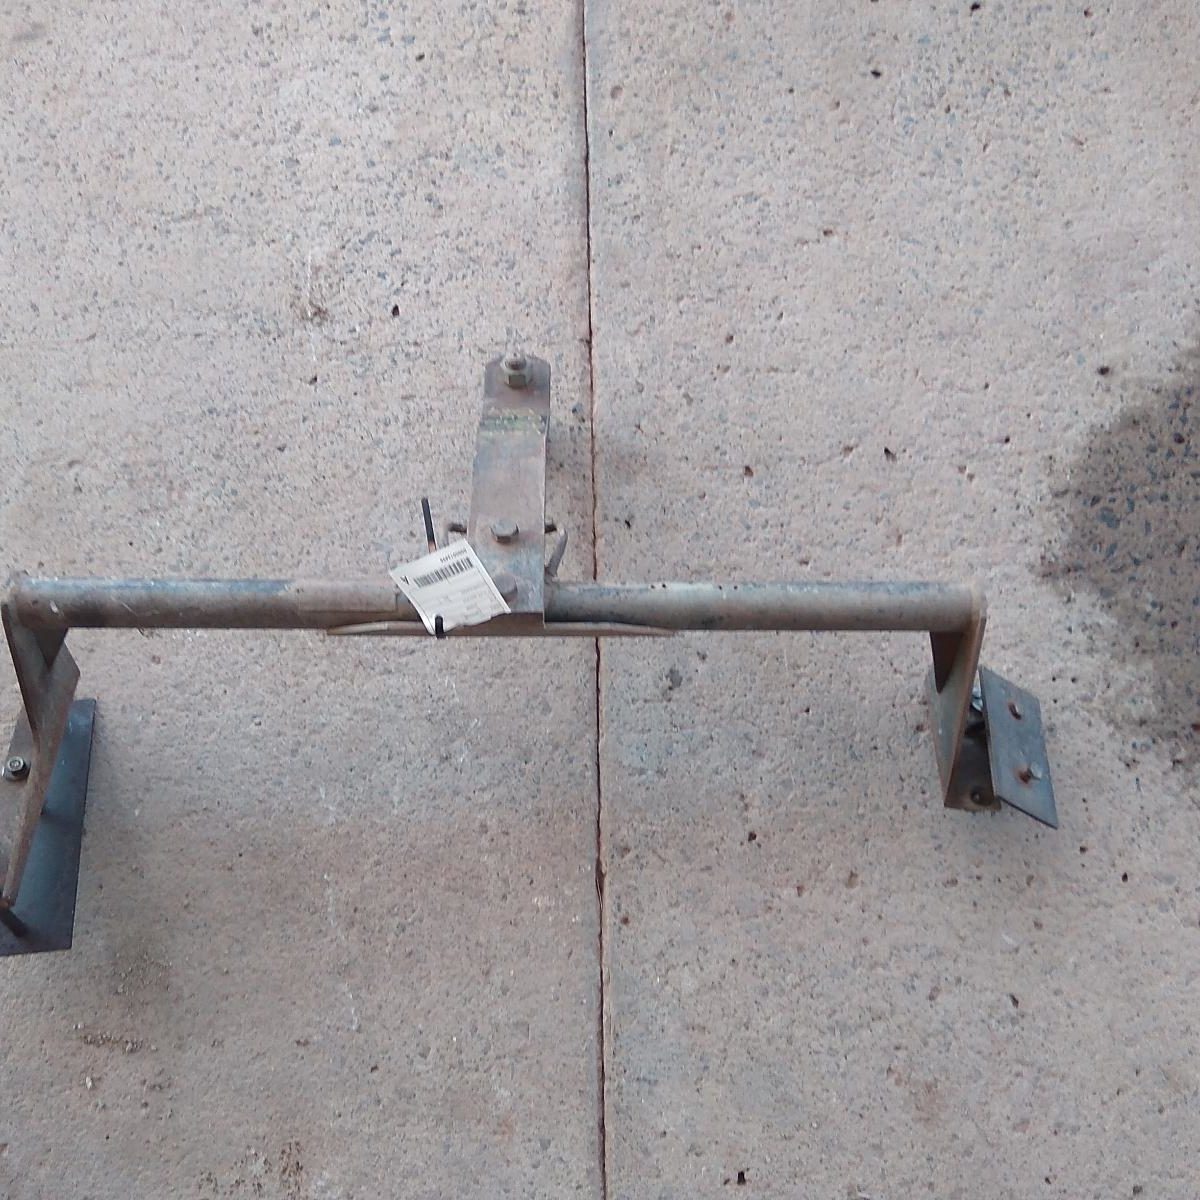 1997 HOLDEN COMMODORE TOWBAR